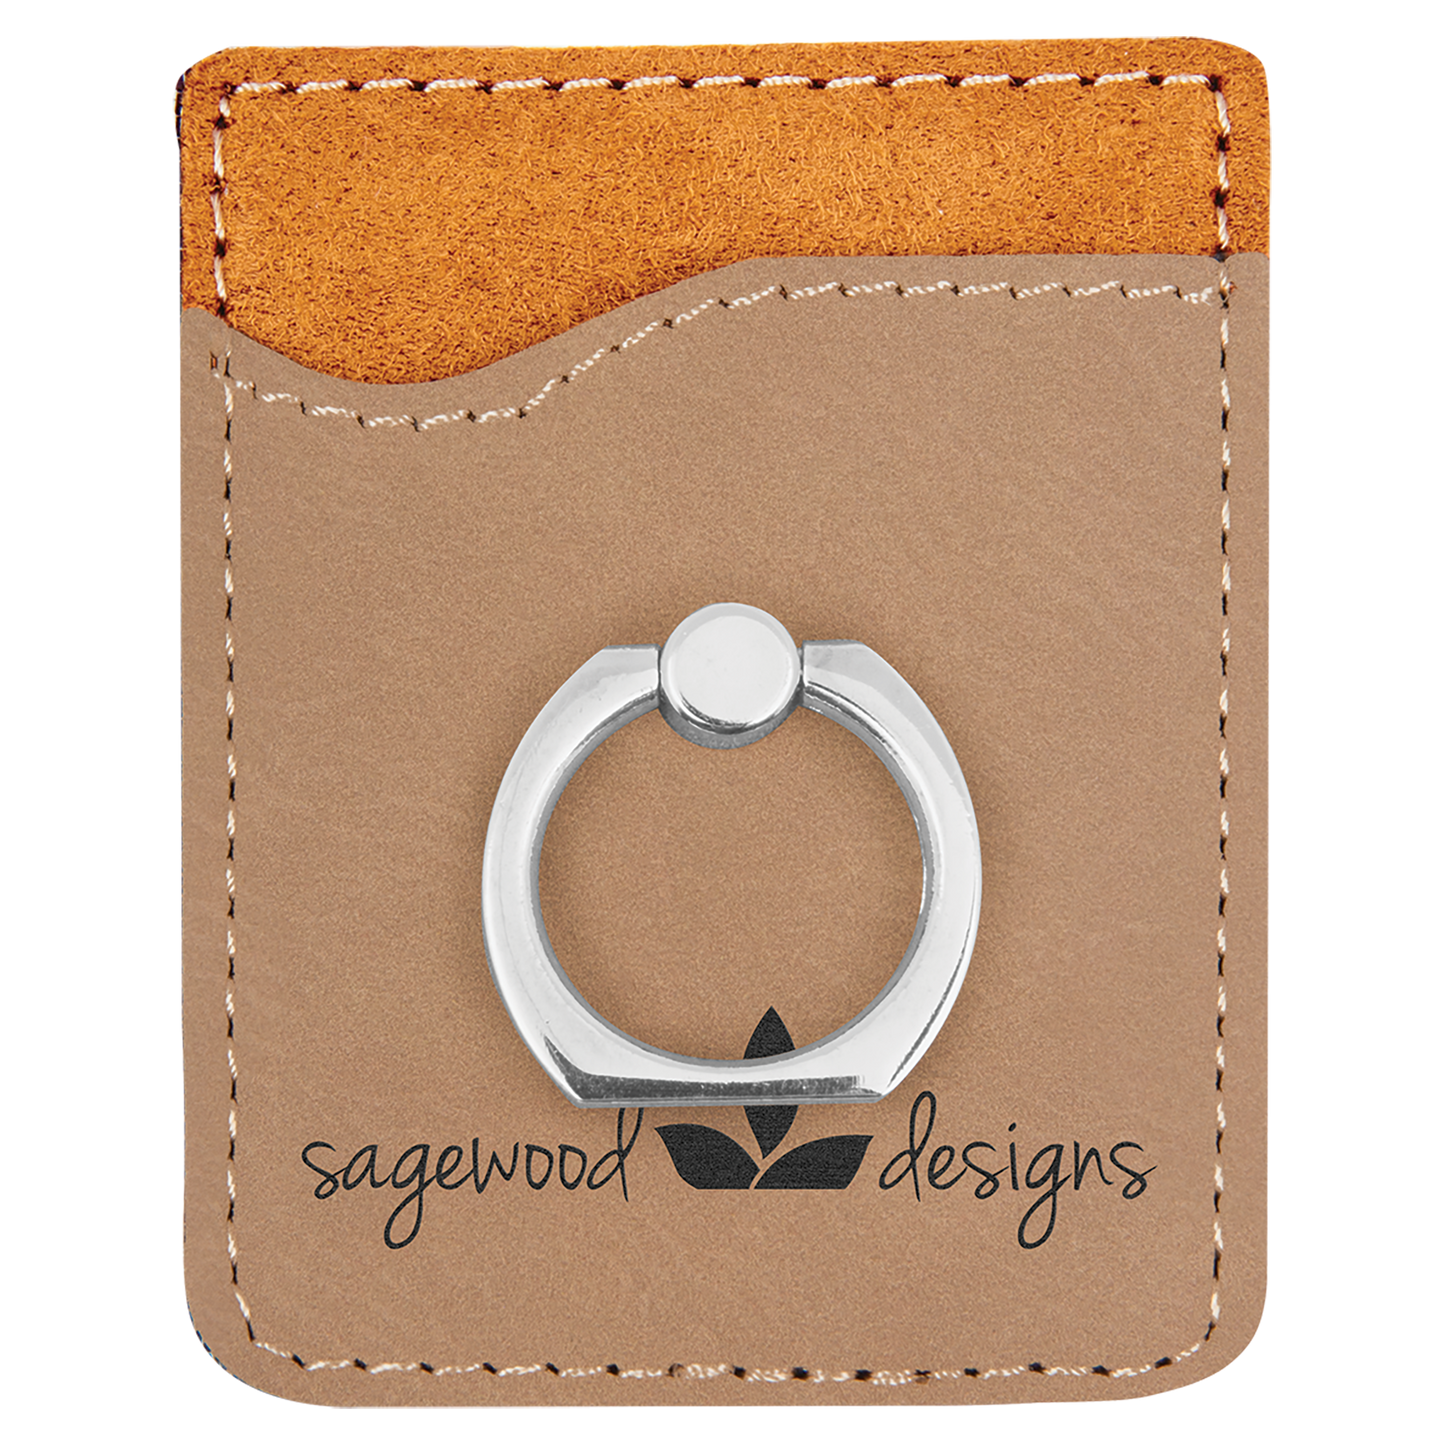 Light Brown Leatherette Phone Wallet with Ring